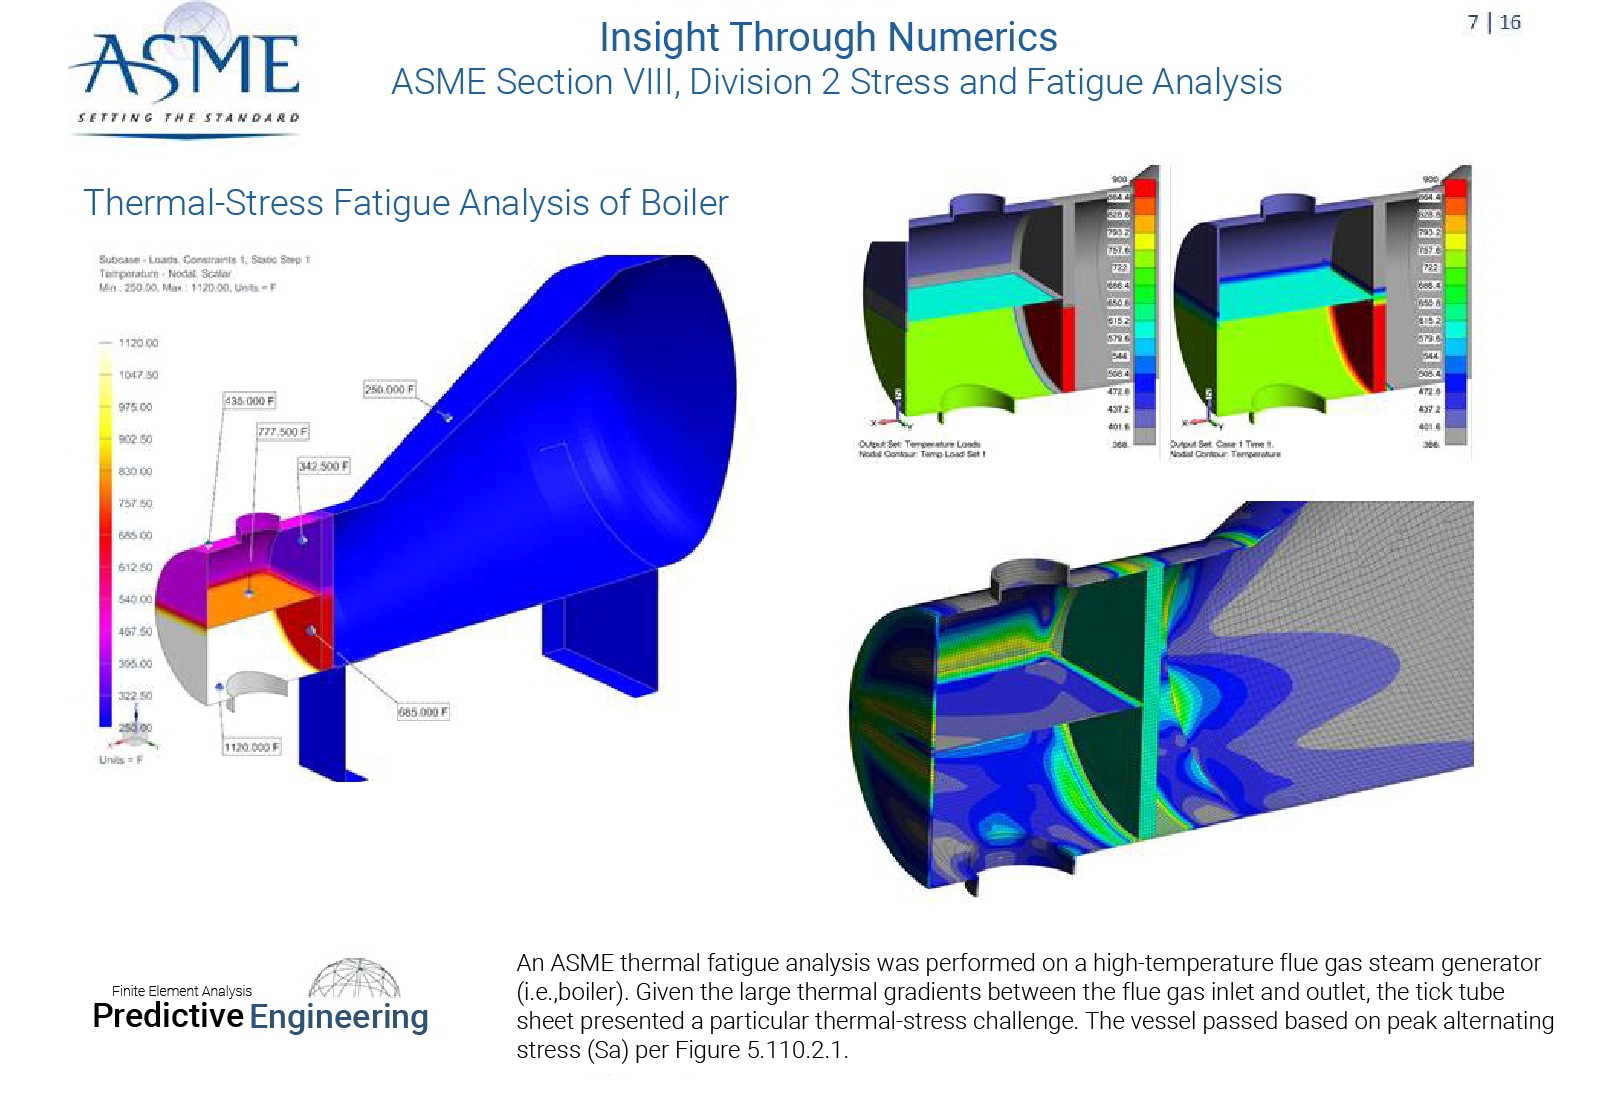 An ASME thermal fatigue analysis was performed on a high-temperature flue gas steam generator (i.e., boiler) - Predictive Engineering ASME BPVC Pressure Vessel Consulting Services